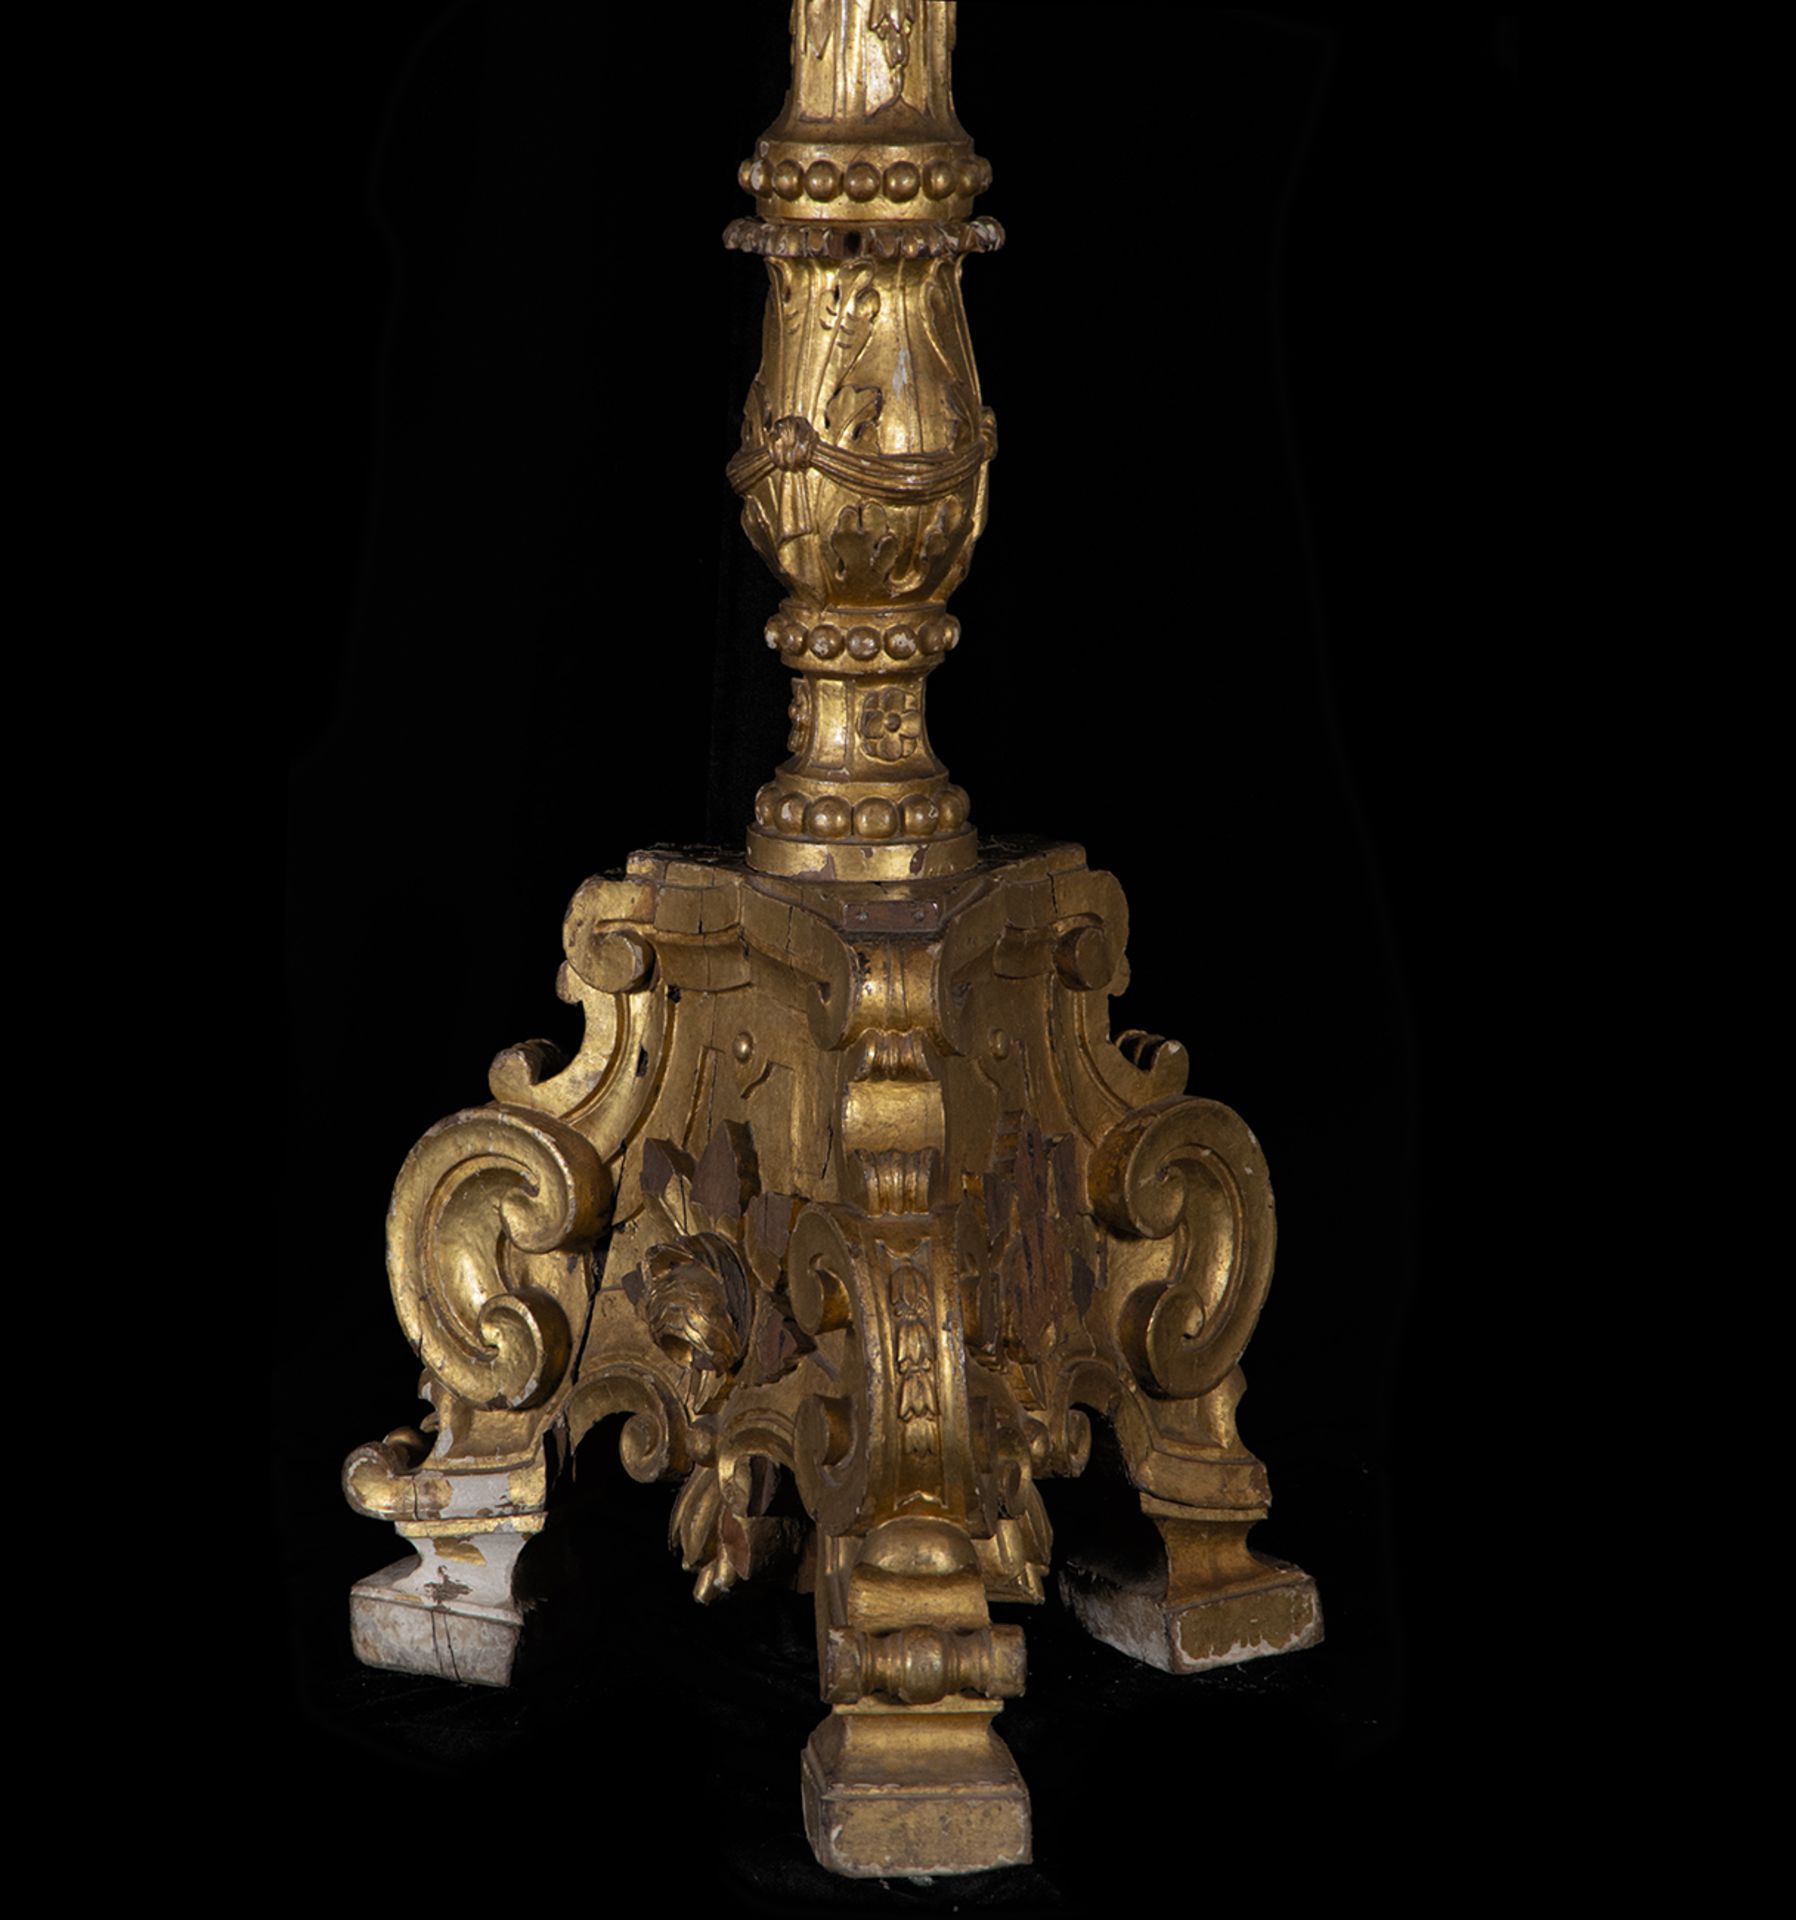 Large Portuguese torch holder in gilded wood, 18th century - Image 6 of 7